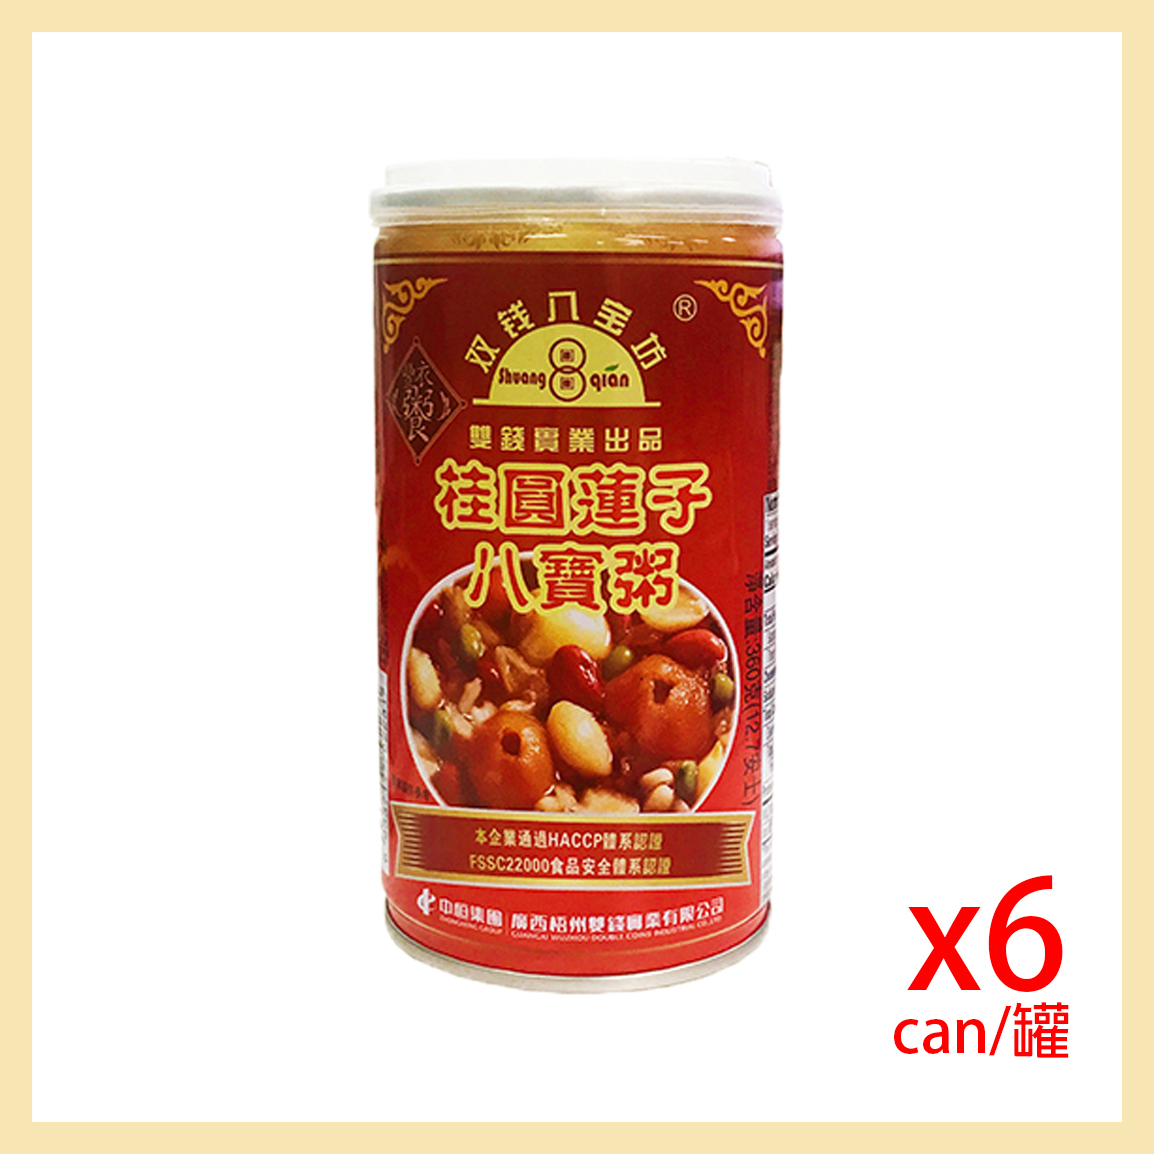 Longan and Loyus Seed Mixed Congee (6cans)